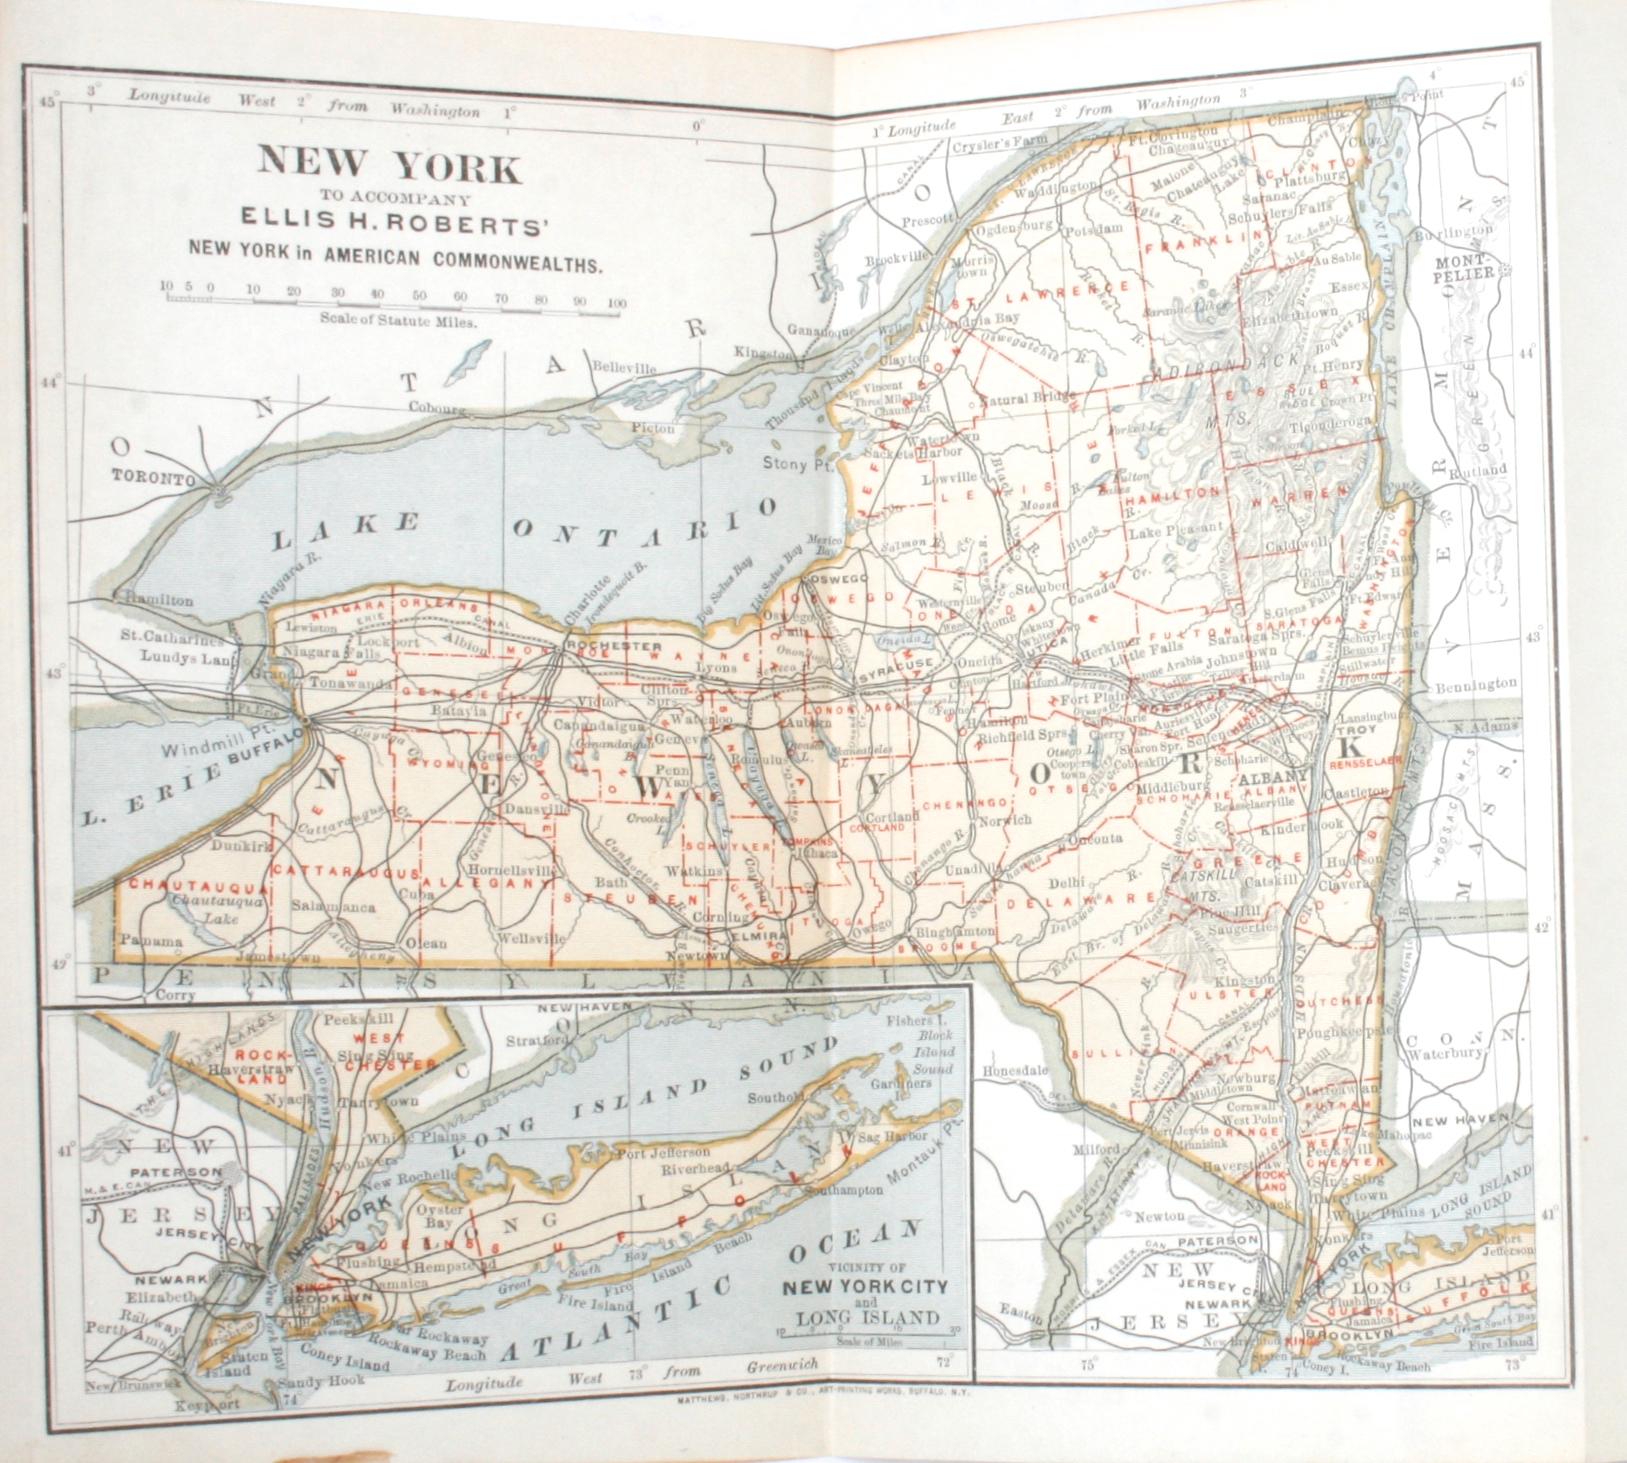 New York, the planting and the growth of the Empire state in two volumes by Ellis H. Roberts. Boston and New York: Houghton, Mifflin and Company, 1892. Moroccan and marbleized paper bound hardcover. 758 pp. Antique history books on the state of New